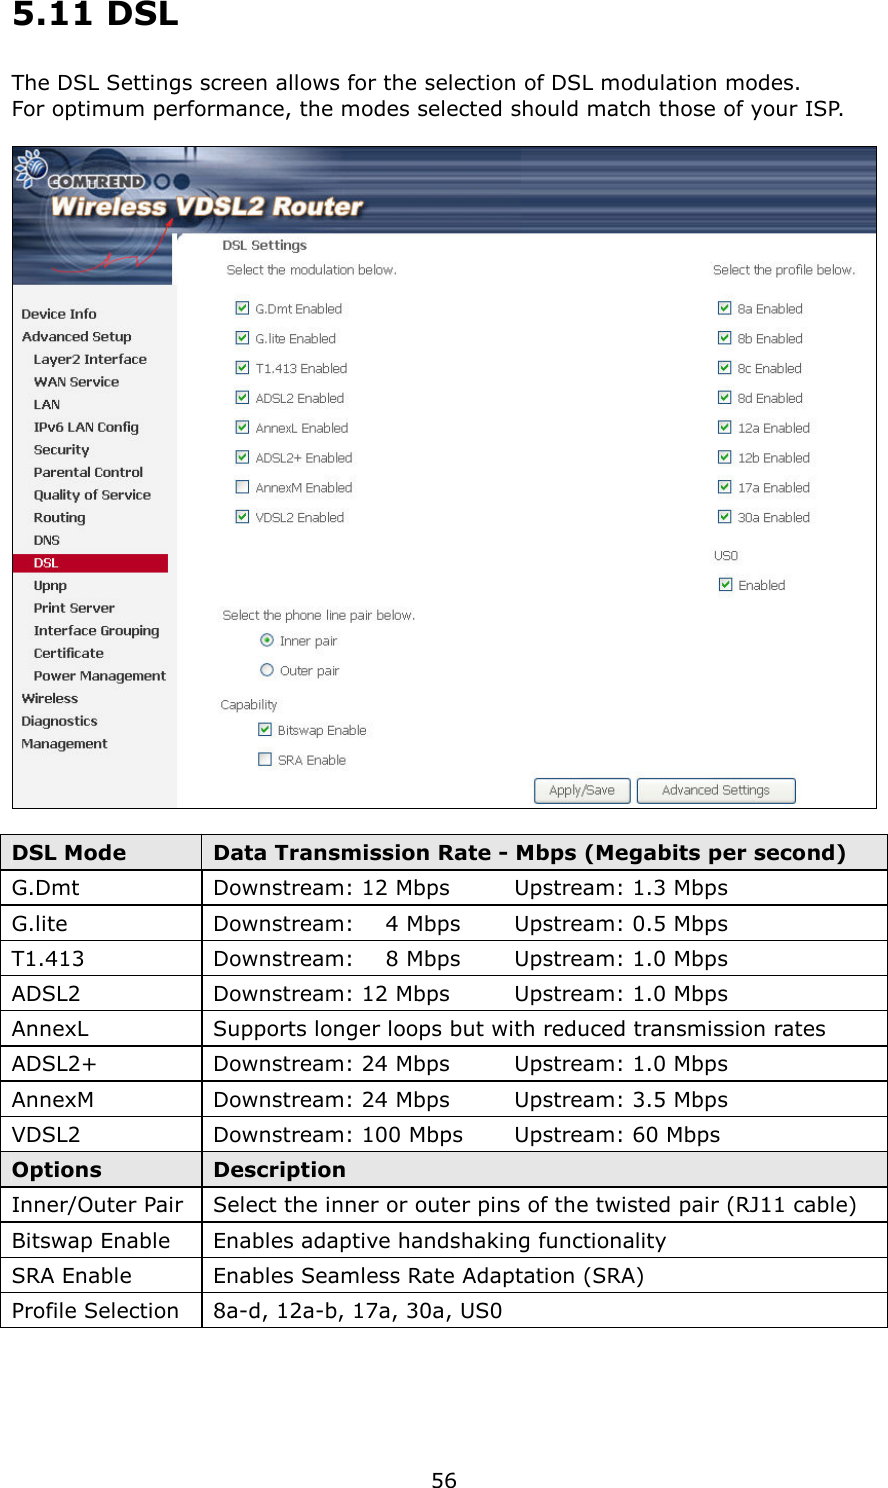   56 5.11 DSL The DSL Settings screen allows for the selection of DSL modulation modes.     For optimum performance, the modes selected should match those of your ISP.    DSL Mode  Data Transmission Rate - Mbps (Megabits per second) G.Dmt  Downstream: 12 Mbps     Upstream: 1.3 Mbps G.lite  Downstream:      4 Mbps    Upstream: 0.5 Mbps T1.413  Downstream:      8 Mbps    Upstream: 1.0 Mbps ADSL2    Downstream: 12 Mbps     Upstream: 1.0 Mbps AnnexL    Supports longer loops but with reduced transmission rates ADSL2+    Downstream: 24 Mbps     Upstream: 1.0 Mbps AnnexM    Downstream: 24 Mbps     Upstream: 3.5 Mbps VDSL2  Downstream: 100 Mbps    Upstream: 60 Mbps Options  Description Inner/Outer Pair Select the inner or outer pins of the twisted pair (RJ11 cable) Bitswap Enable  Enables adaptive handshaking functionality SRA Enable  Enables Seamless Rate Adaptation (SRA) Profile Selection  8a-d, 12a-b, 17a, 30a, US0  